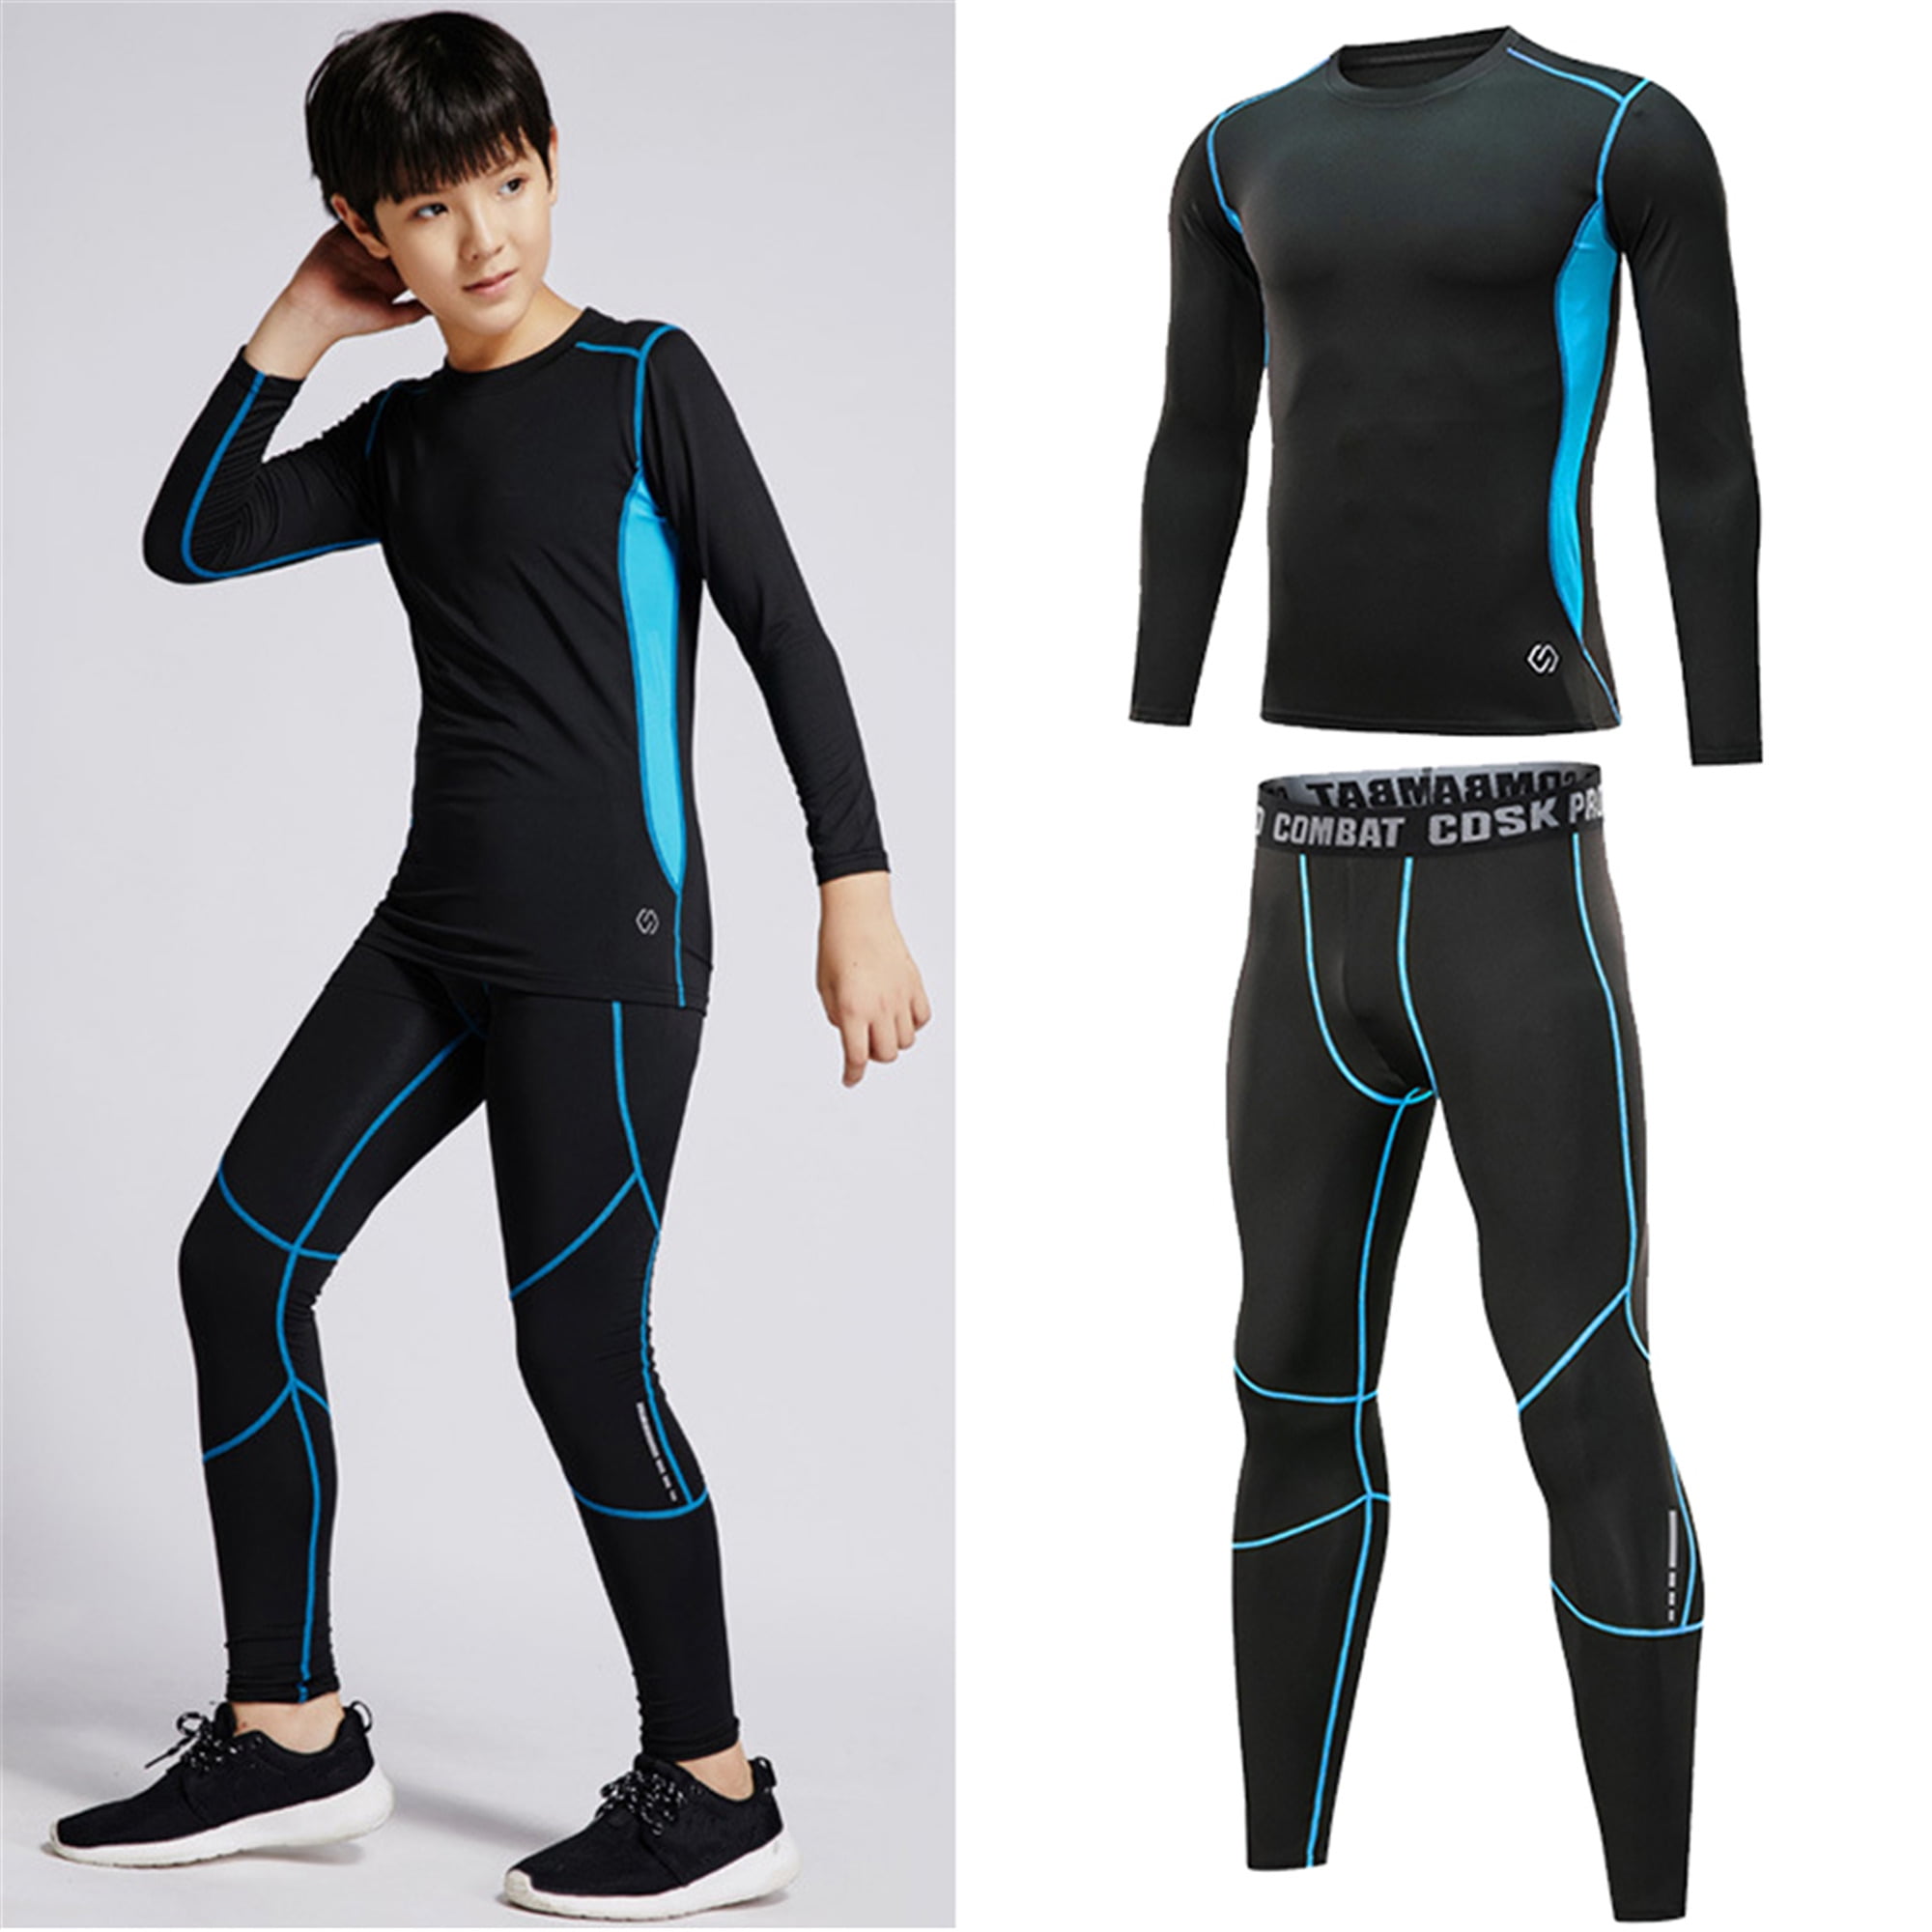 MLFU Boys Thermal Underwear Long Johns Set, Warm Base Layer Top for ...